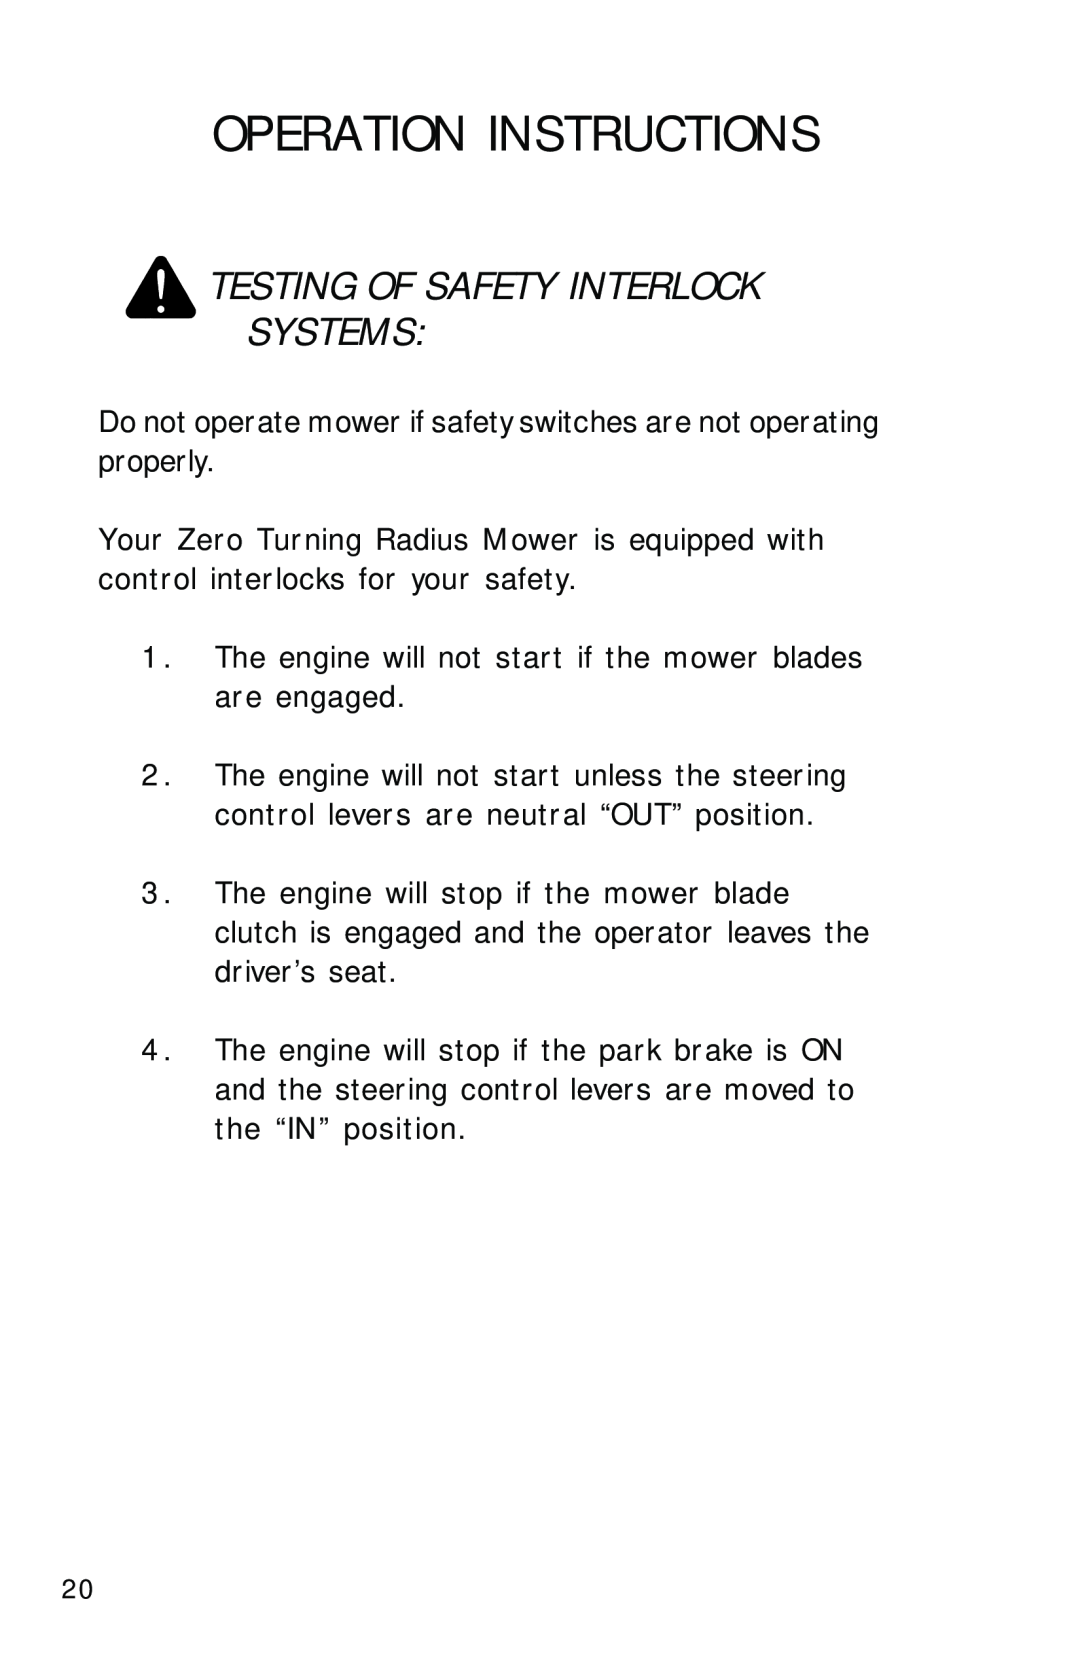 Dixon ZTR 2700, 12828-0603 manual Testing Of Safety Interlock Systems, Operation Instructions 